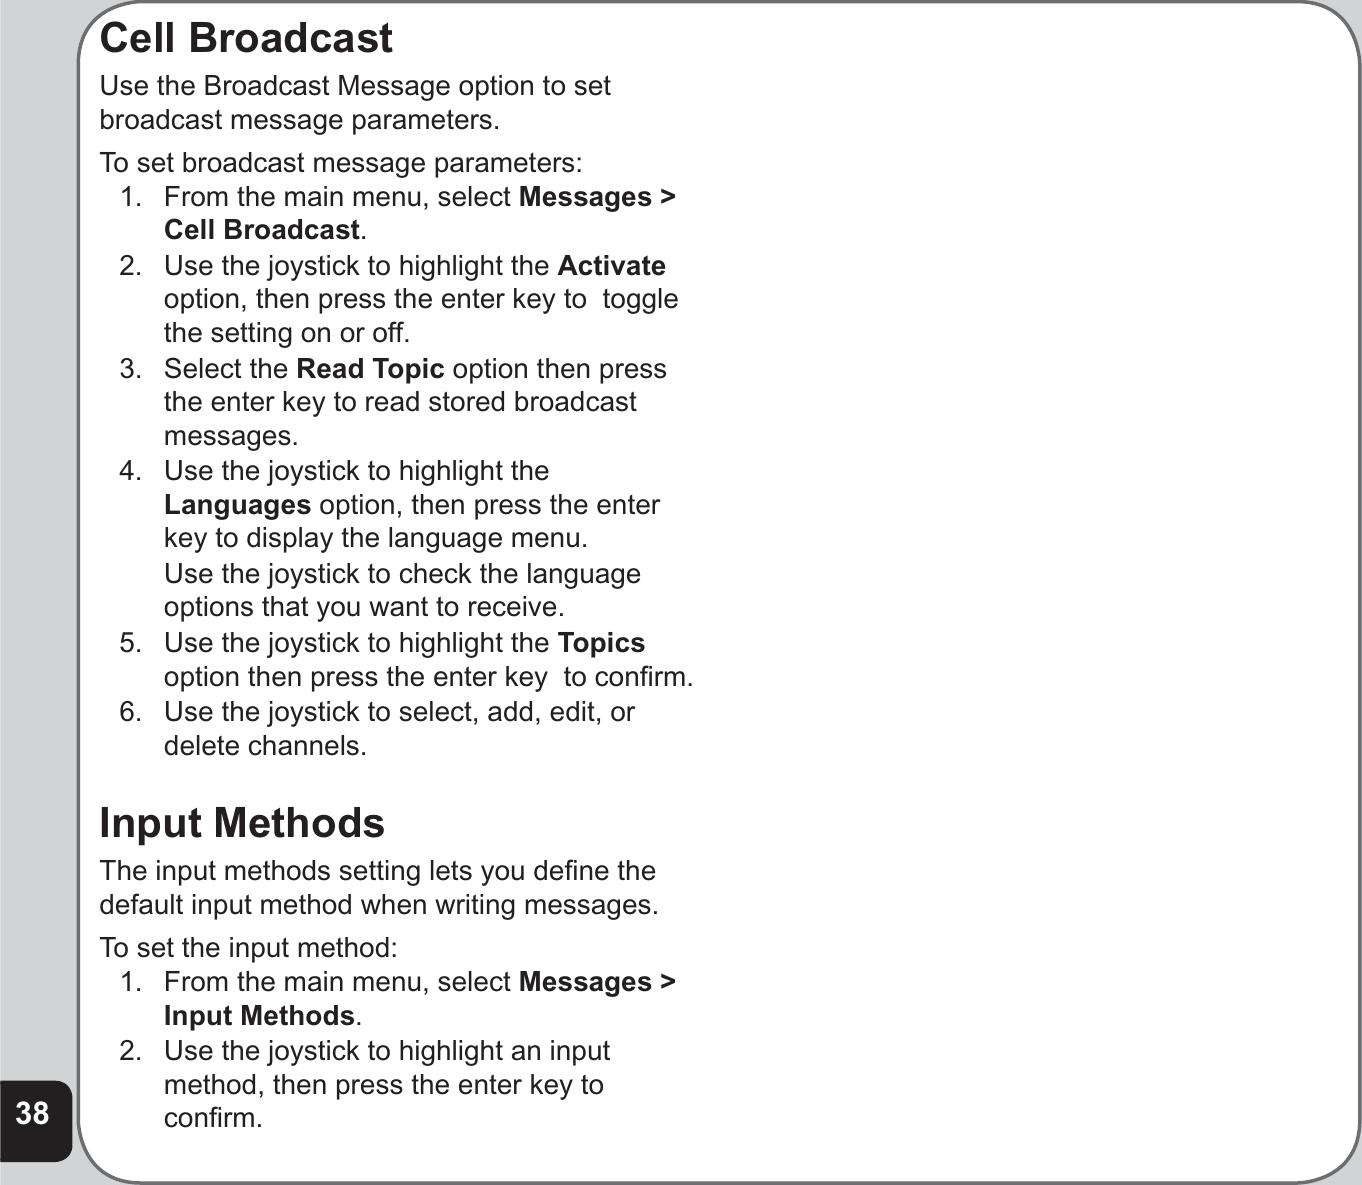 38Cell BroadcastUse the Broadcast Message option to set broadcast message parameters. To set broadcast message parameters:1.  From the main menu, select Messages &gt; Cell Broadcast.2.  Use the joystick to highlight the Activateoption, then press the enter key to  toggle the setting on or off.3. Select the Read Topic option then press the enter key to read stored broadcast messages.4.  Use the joystick to highlight the Languages option, then press the enter key to display the language menu.  Use the joystick to check the language options that you want to receive.5.  Use the joystick to highlight the Topicsoption then press the enter key  to conﬁ rm.6.  Use the joystick to select, add, edit, or delete channels.Input MethodsThe input methods setting lets you deﬁ ne the default input method when writing messages. To set the input method:1.  From the main menu, select Messages &gt; Input Methods.2.  Use the joystick to highlight an input method, then press the enter key to conﬁ rm.